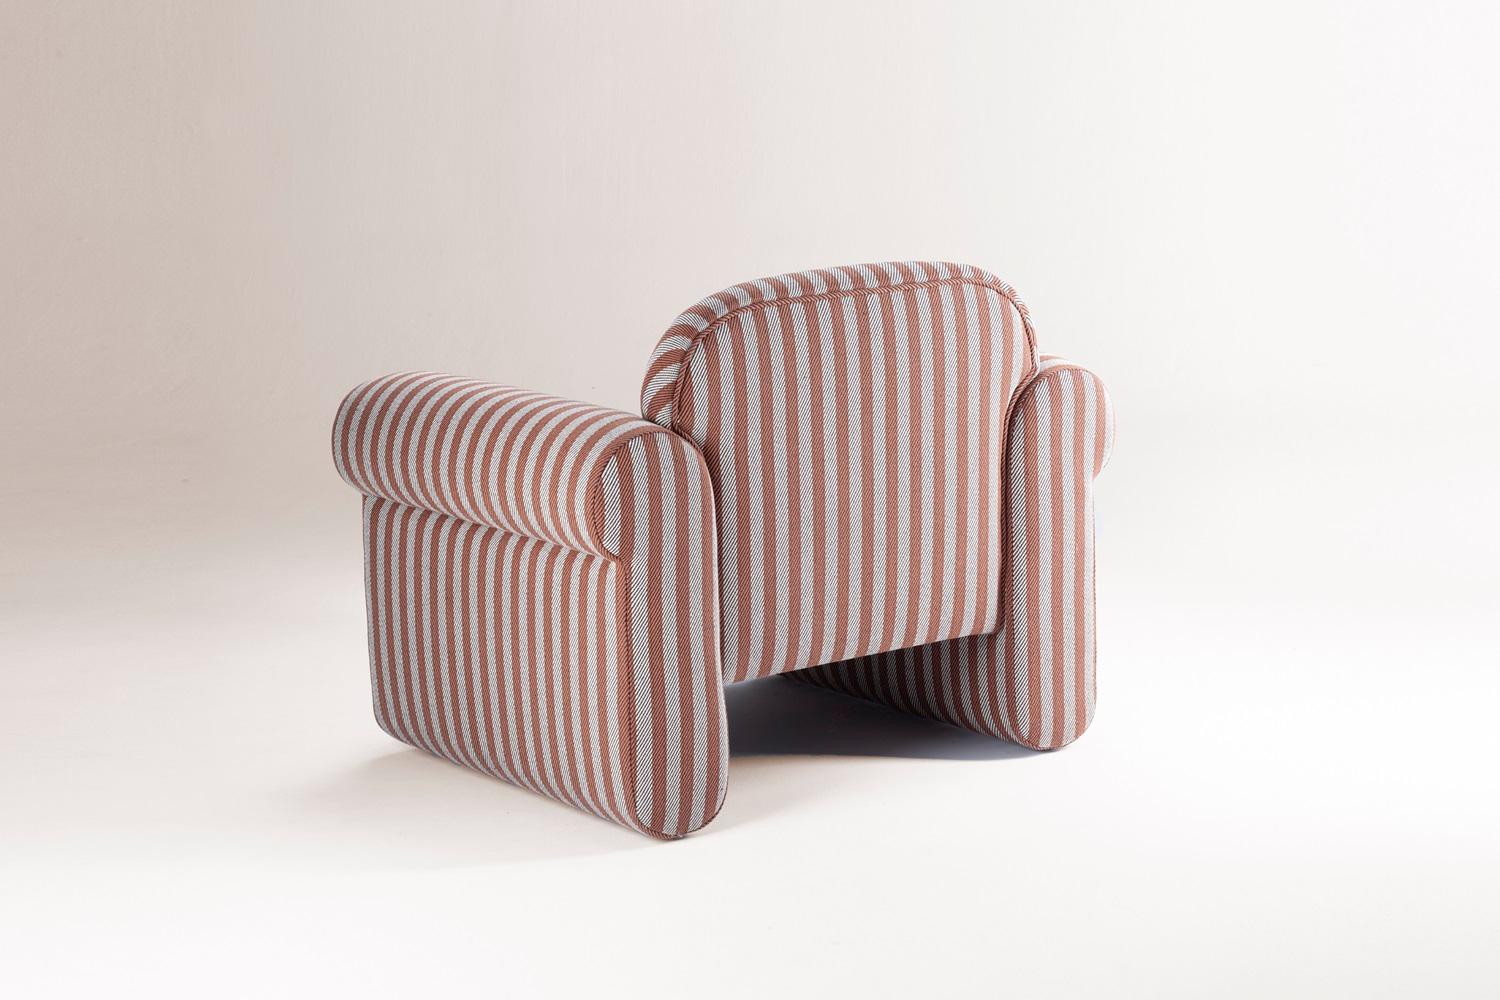 Portuguese DOOQ! NEW! Organic Modern Oscar Armchair, Striped in Brown and Beige Fabric For Sale